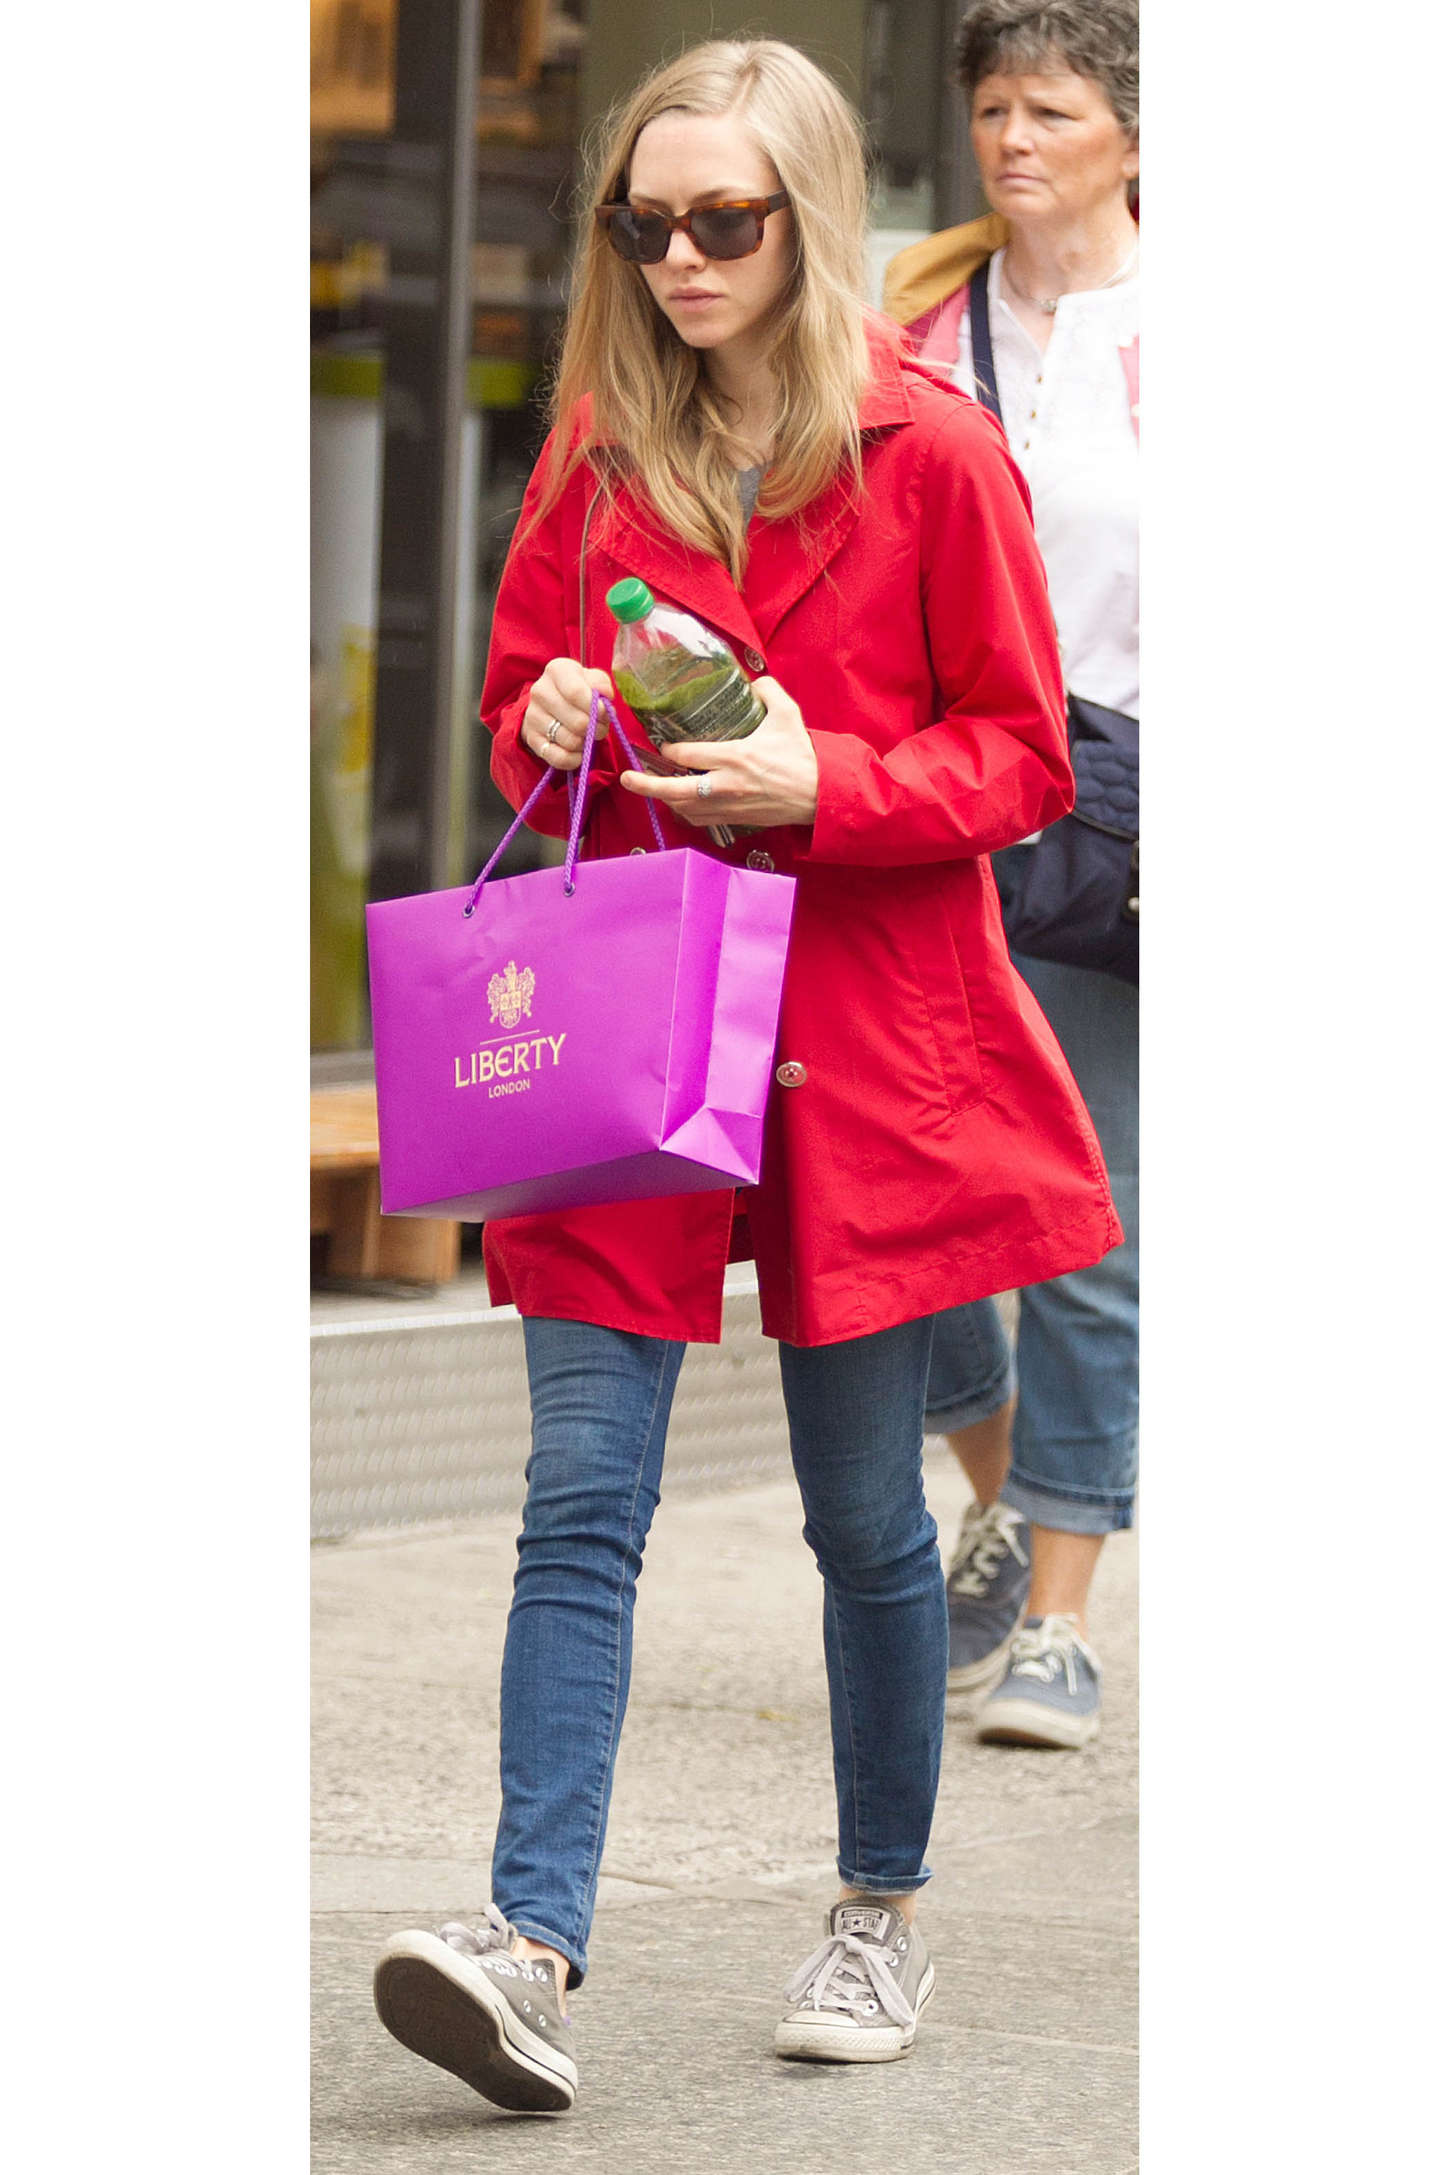 Amanda Seyfried in Red Jacket and Jeans -09 | GotCeleb